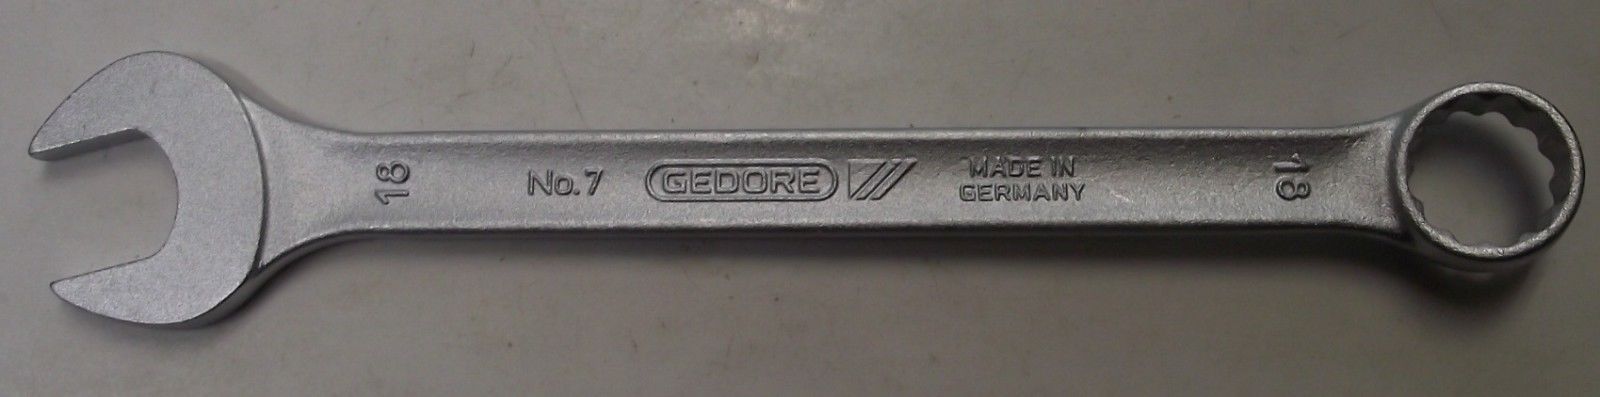 Gedore 6091880 18 mm Combination Spanner Wrench Germany